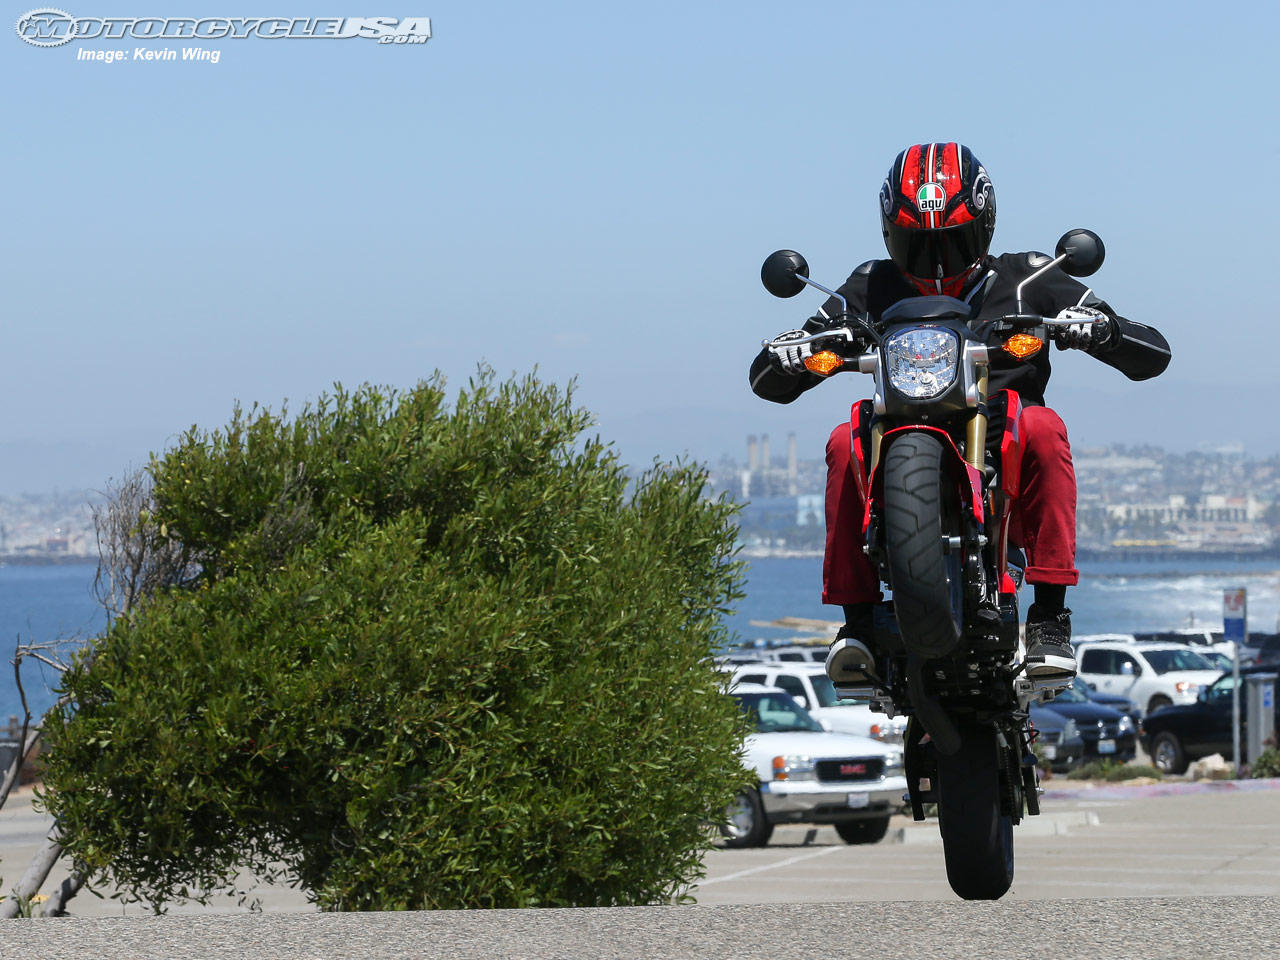 grom wallpaper,land vehicle,vehicle,motorcycle,motorcycling,supermoto